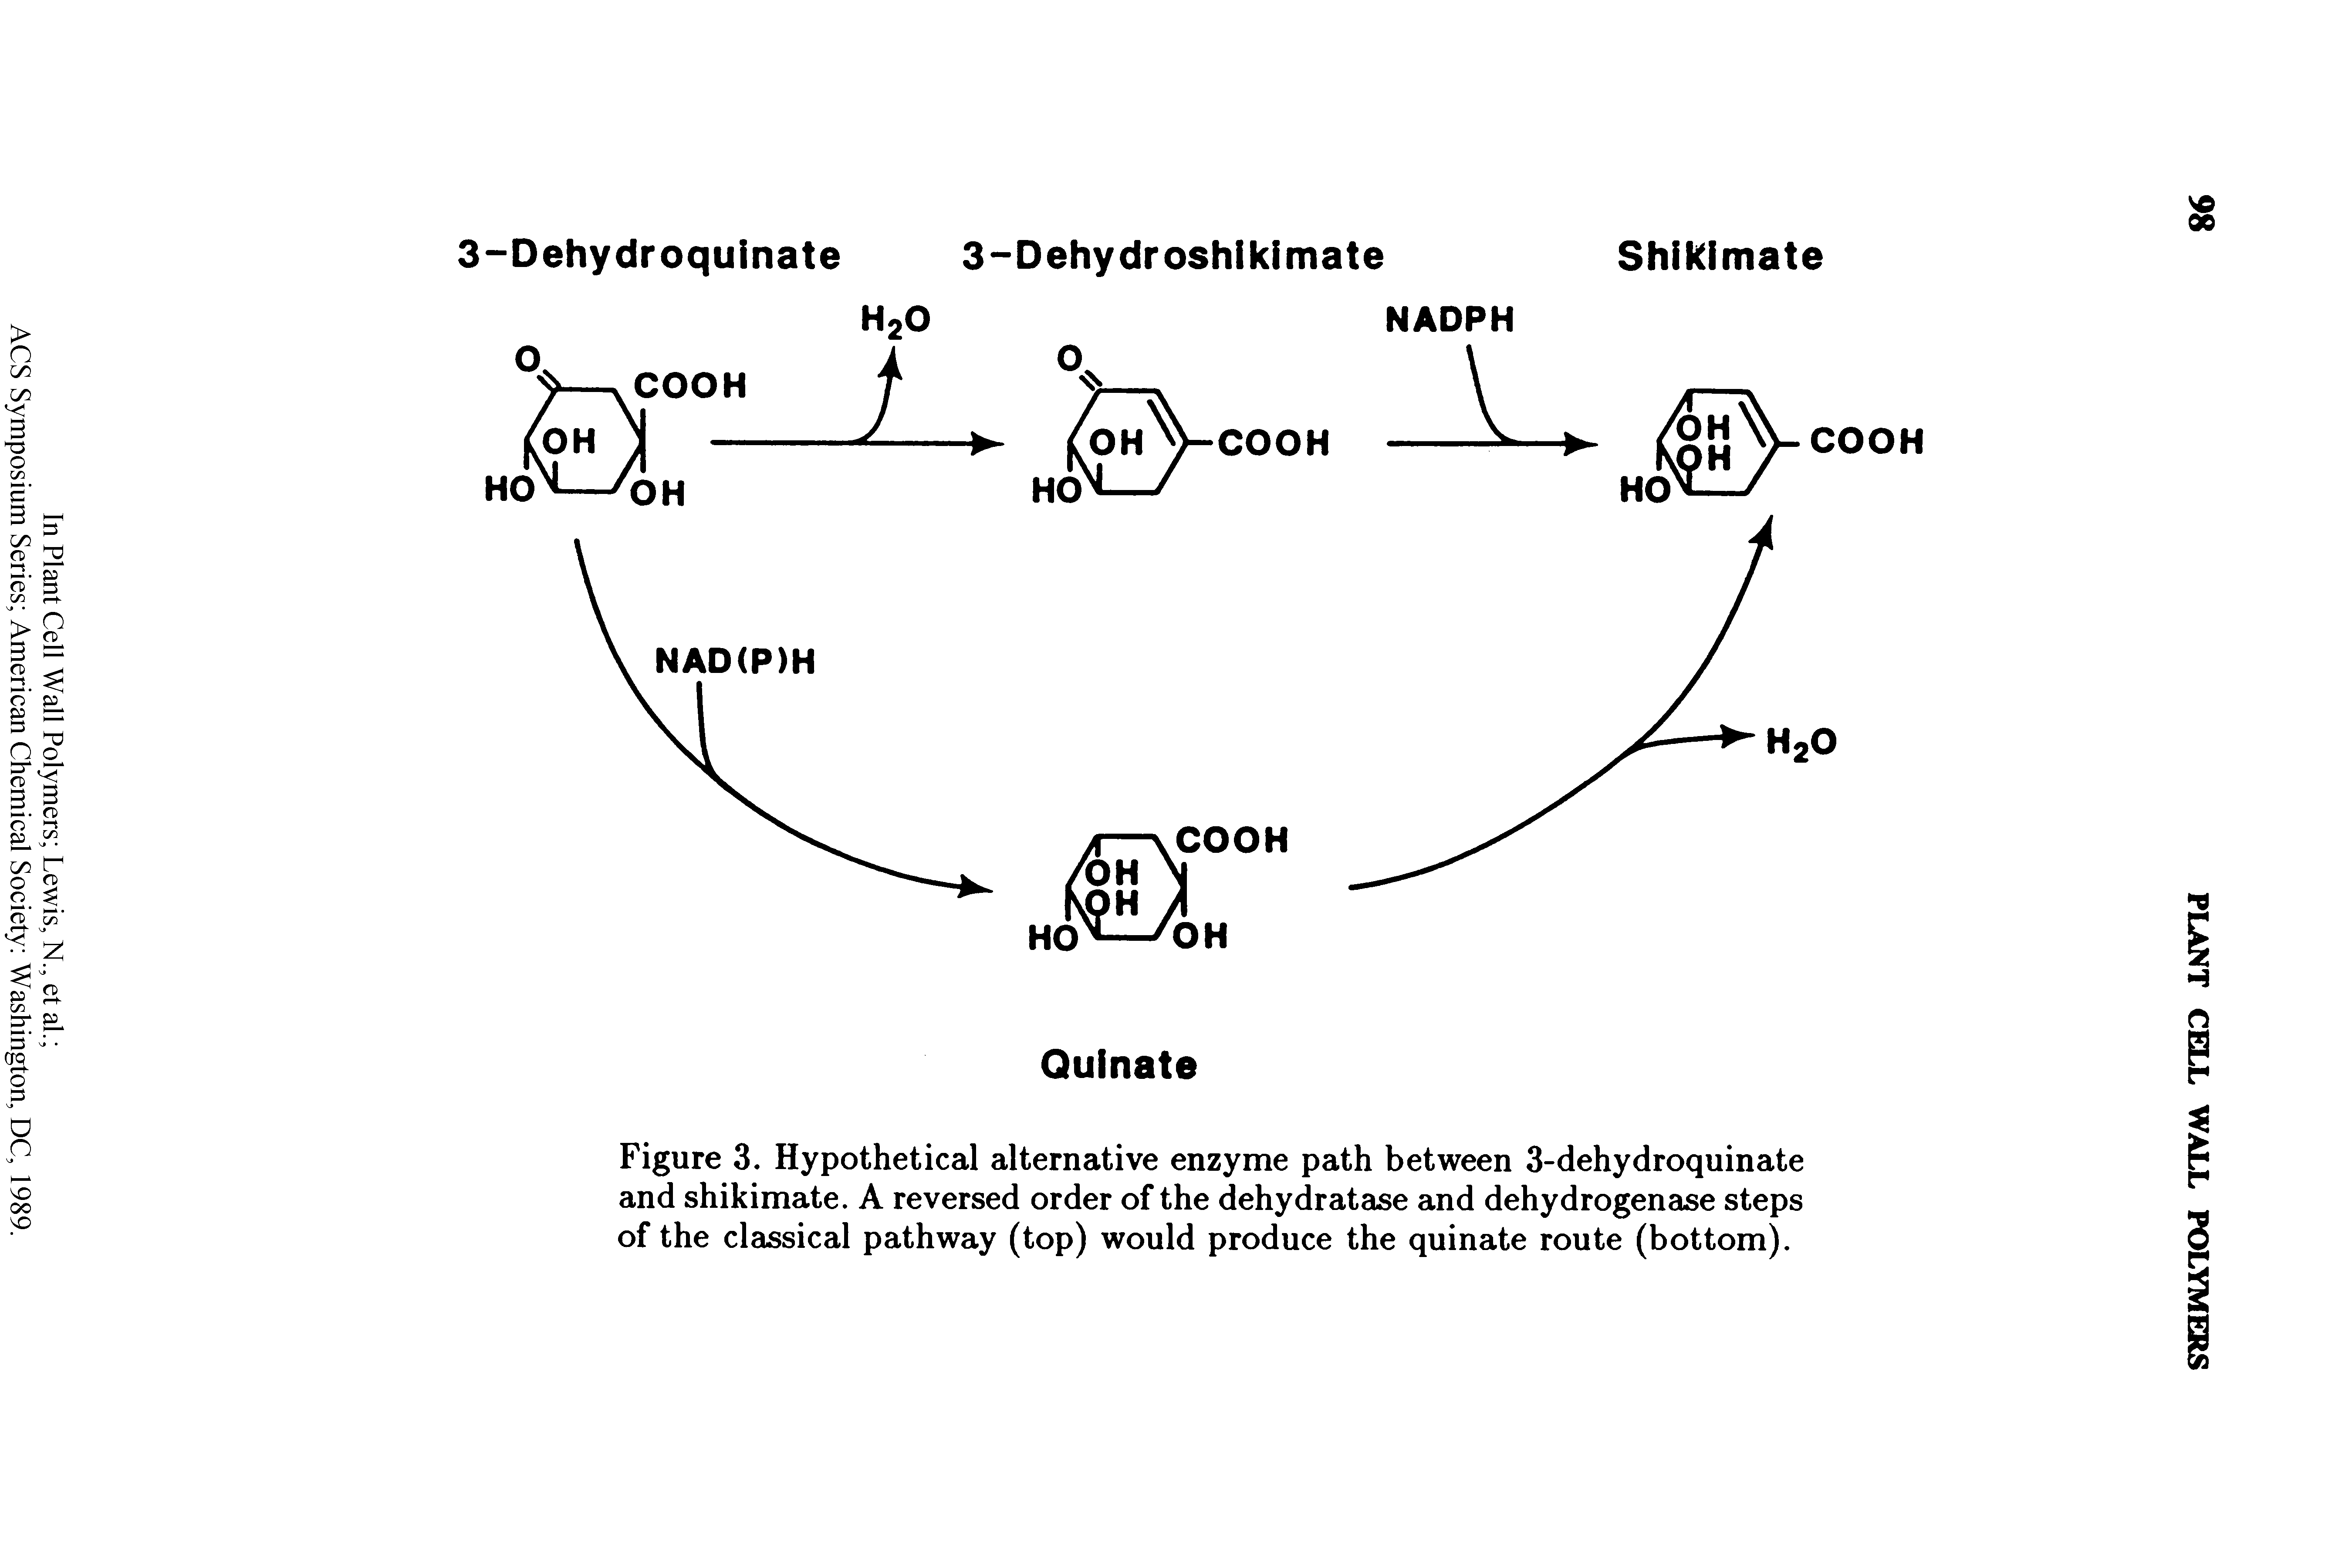 Figure 3. Hypothetical alternative enzyme path between 3-dehydroquinate and shikimate. A reversed order of the dehydratase and dehydrogenase steps of the classical pathway (top) would produce the quinate route (bottom).